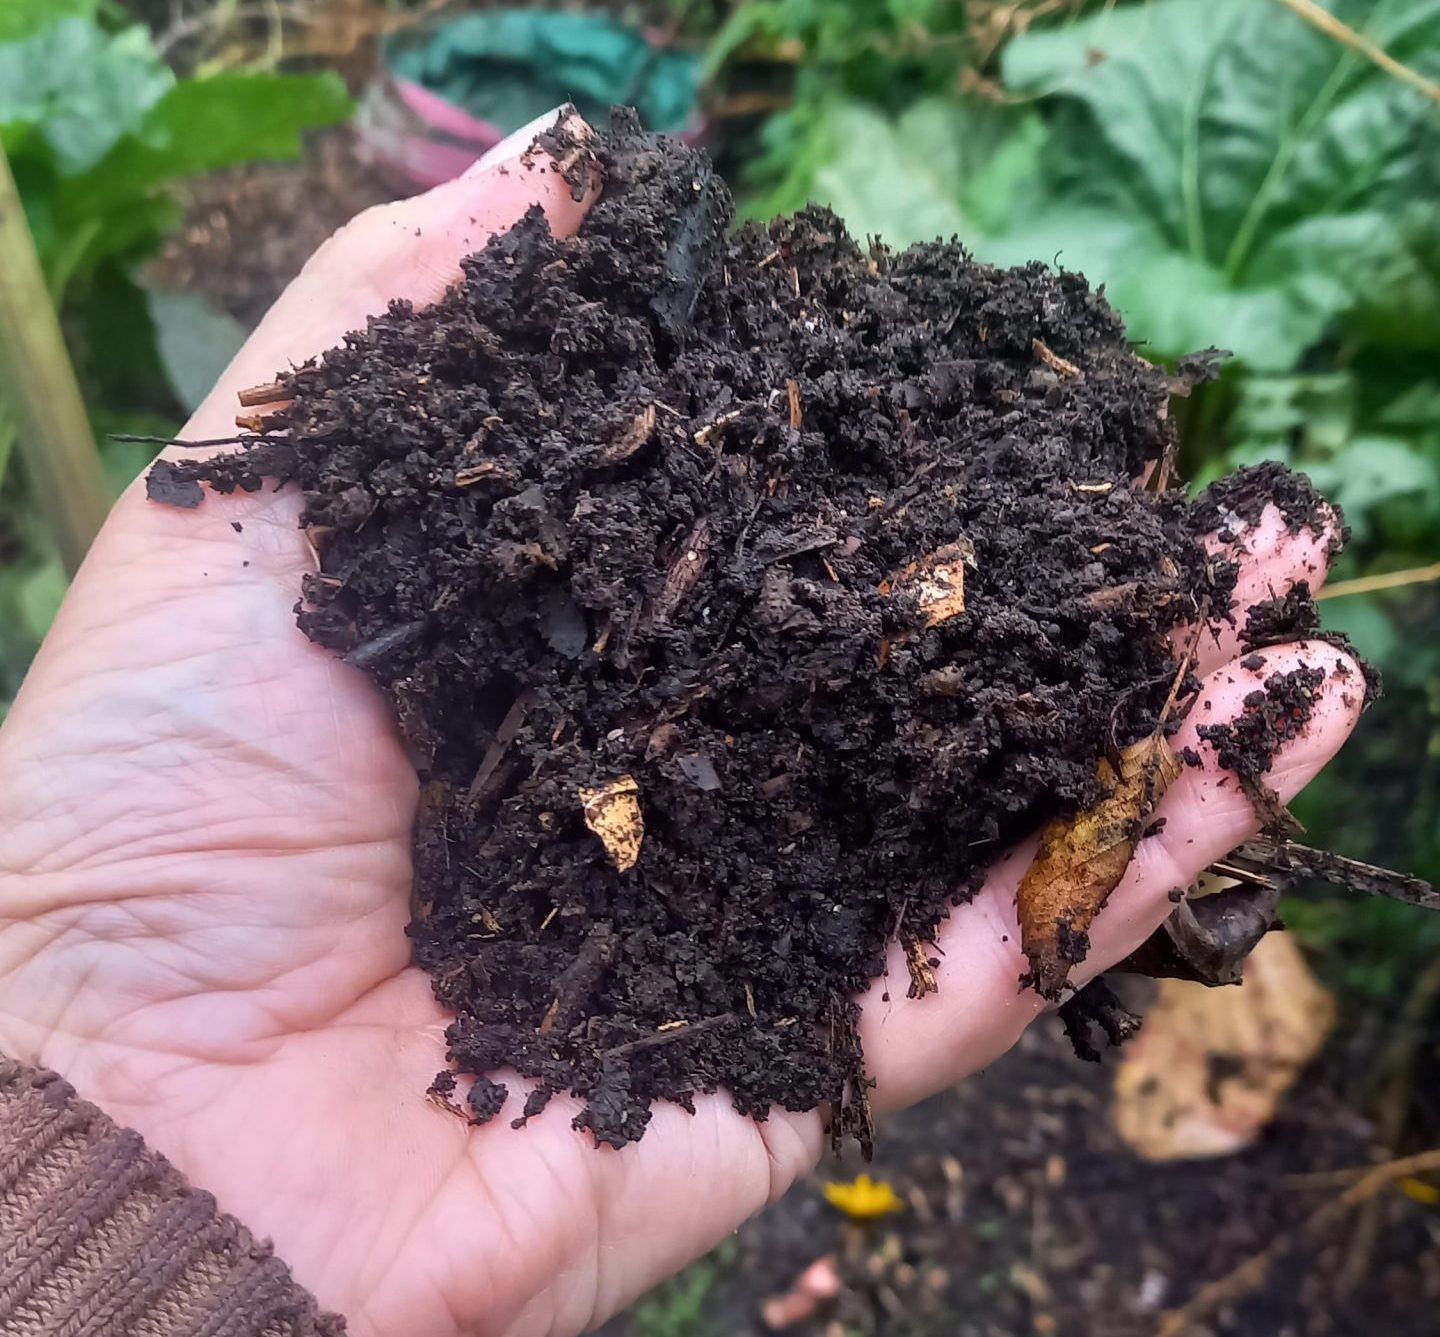 Hand containing dark brown compost